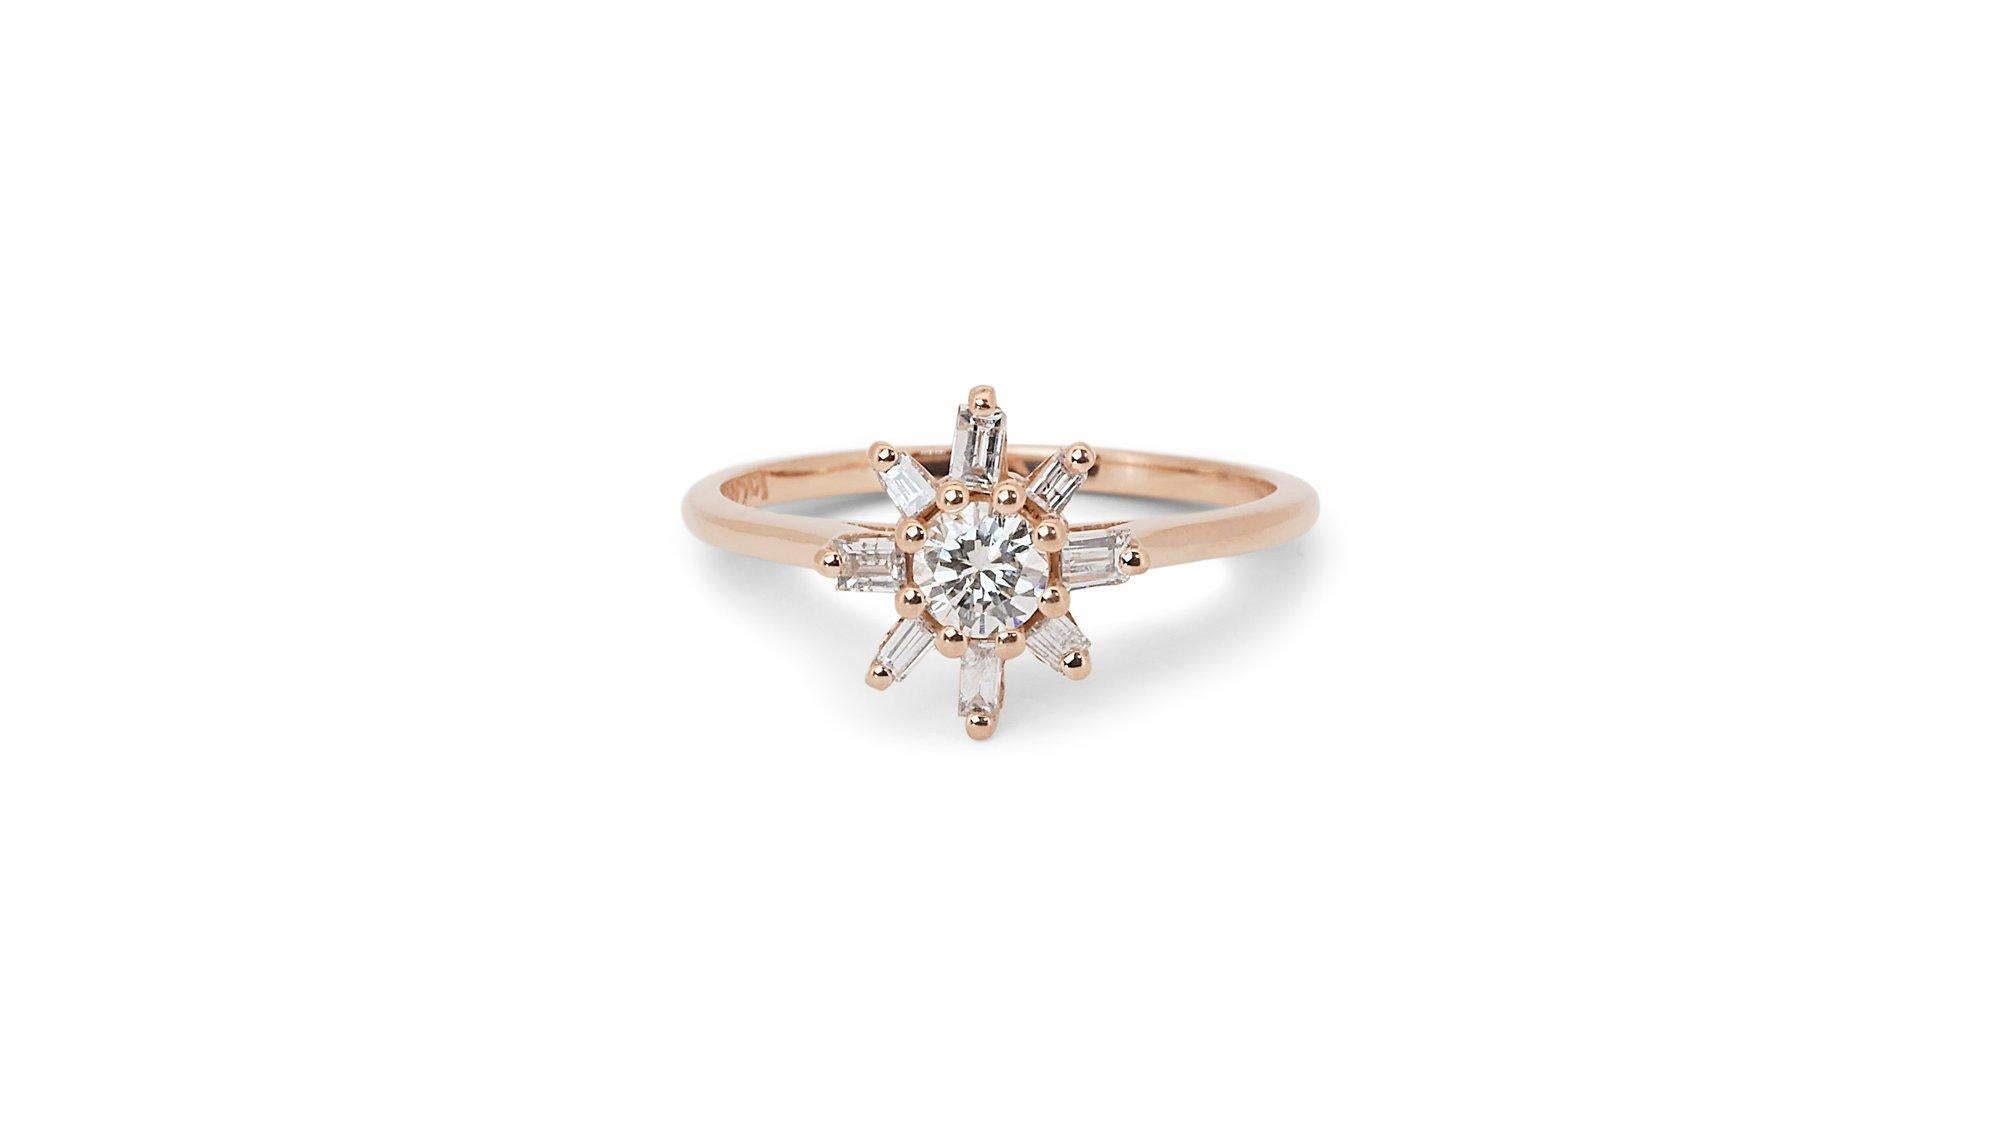 A beautiful unique cluster ring with a dazzling 0.25 carat round Brilliant natural diamond. It has 0.3 carat of side diamonds which add more to its elegance. The jewelry is made of 18K Rose Gold with a high quality polish. It comes with an AIG